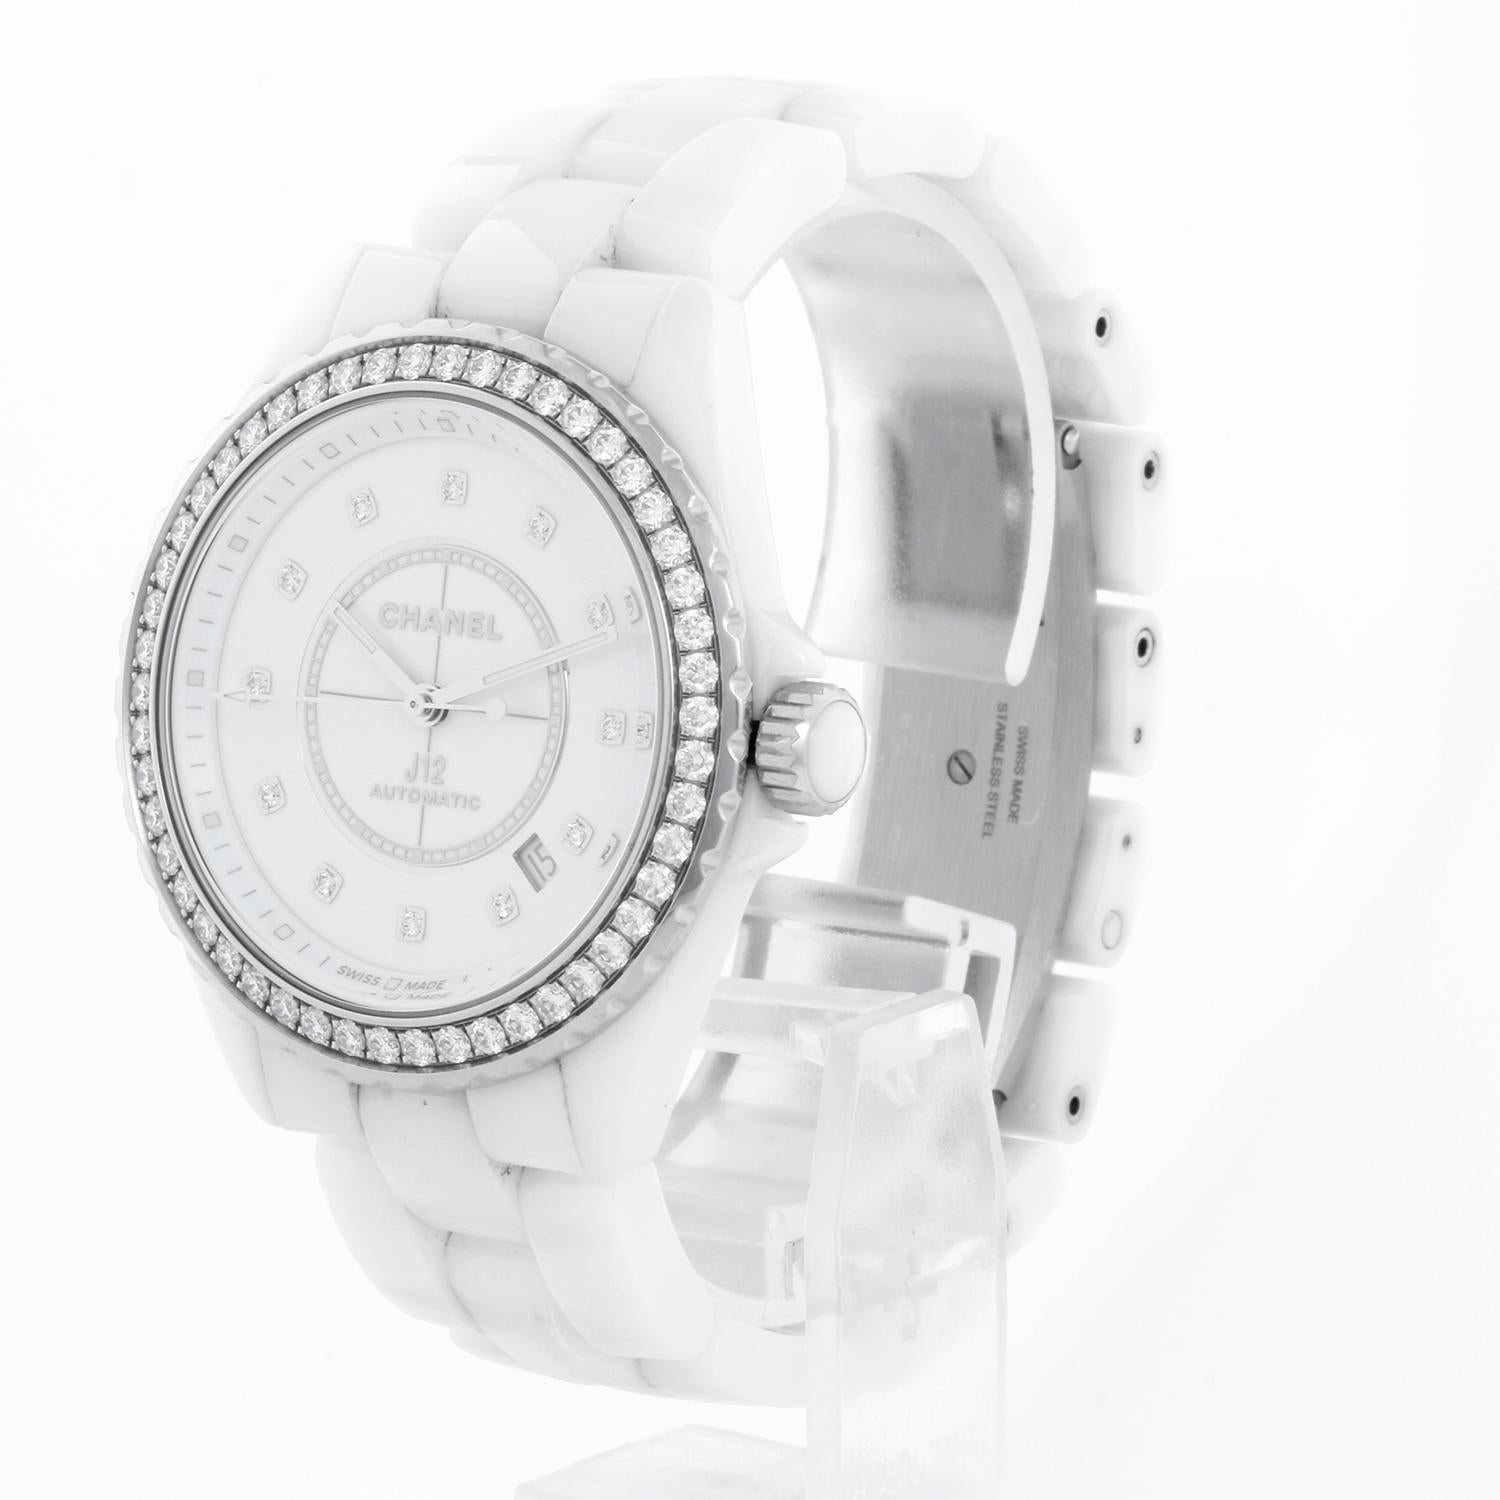 Chanel J12 White Ceramic Diamond Bezel Ladies Watch H7189 - Automatic. Ceramic case ( 38 mm ) with diamond bezel  set with 50 brilliant-cut diamonds (~1.51 carat). White dial with diamond markers and date between 4 & 5 o'clock. White ceramic link